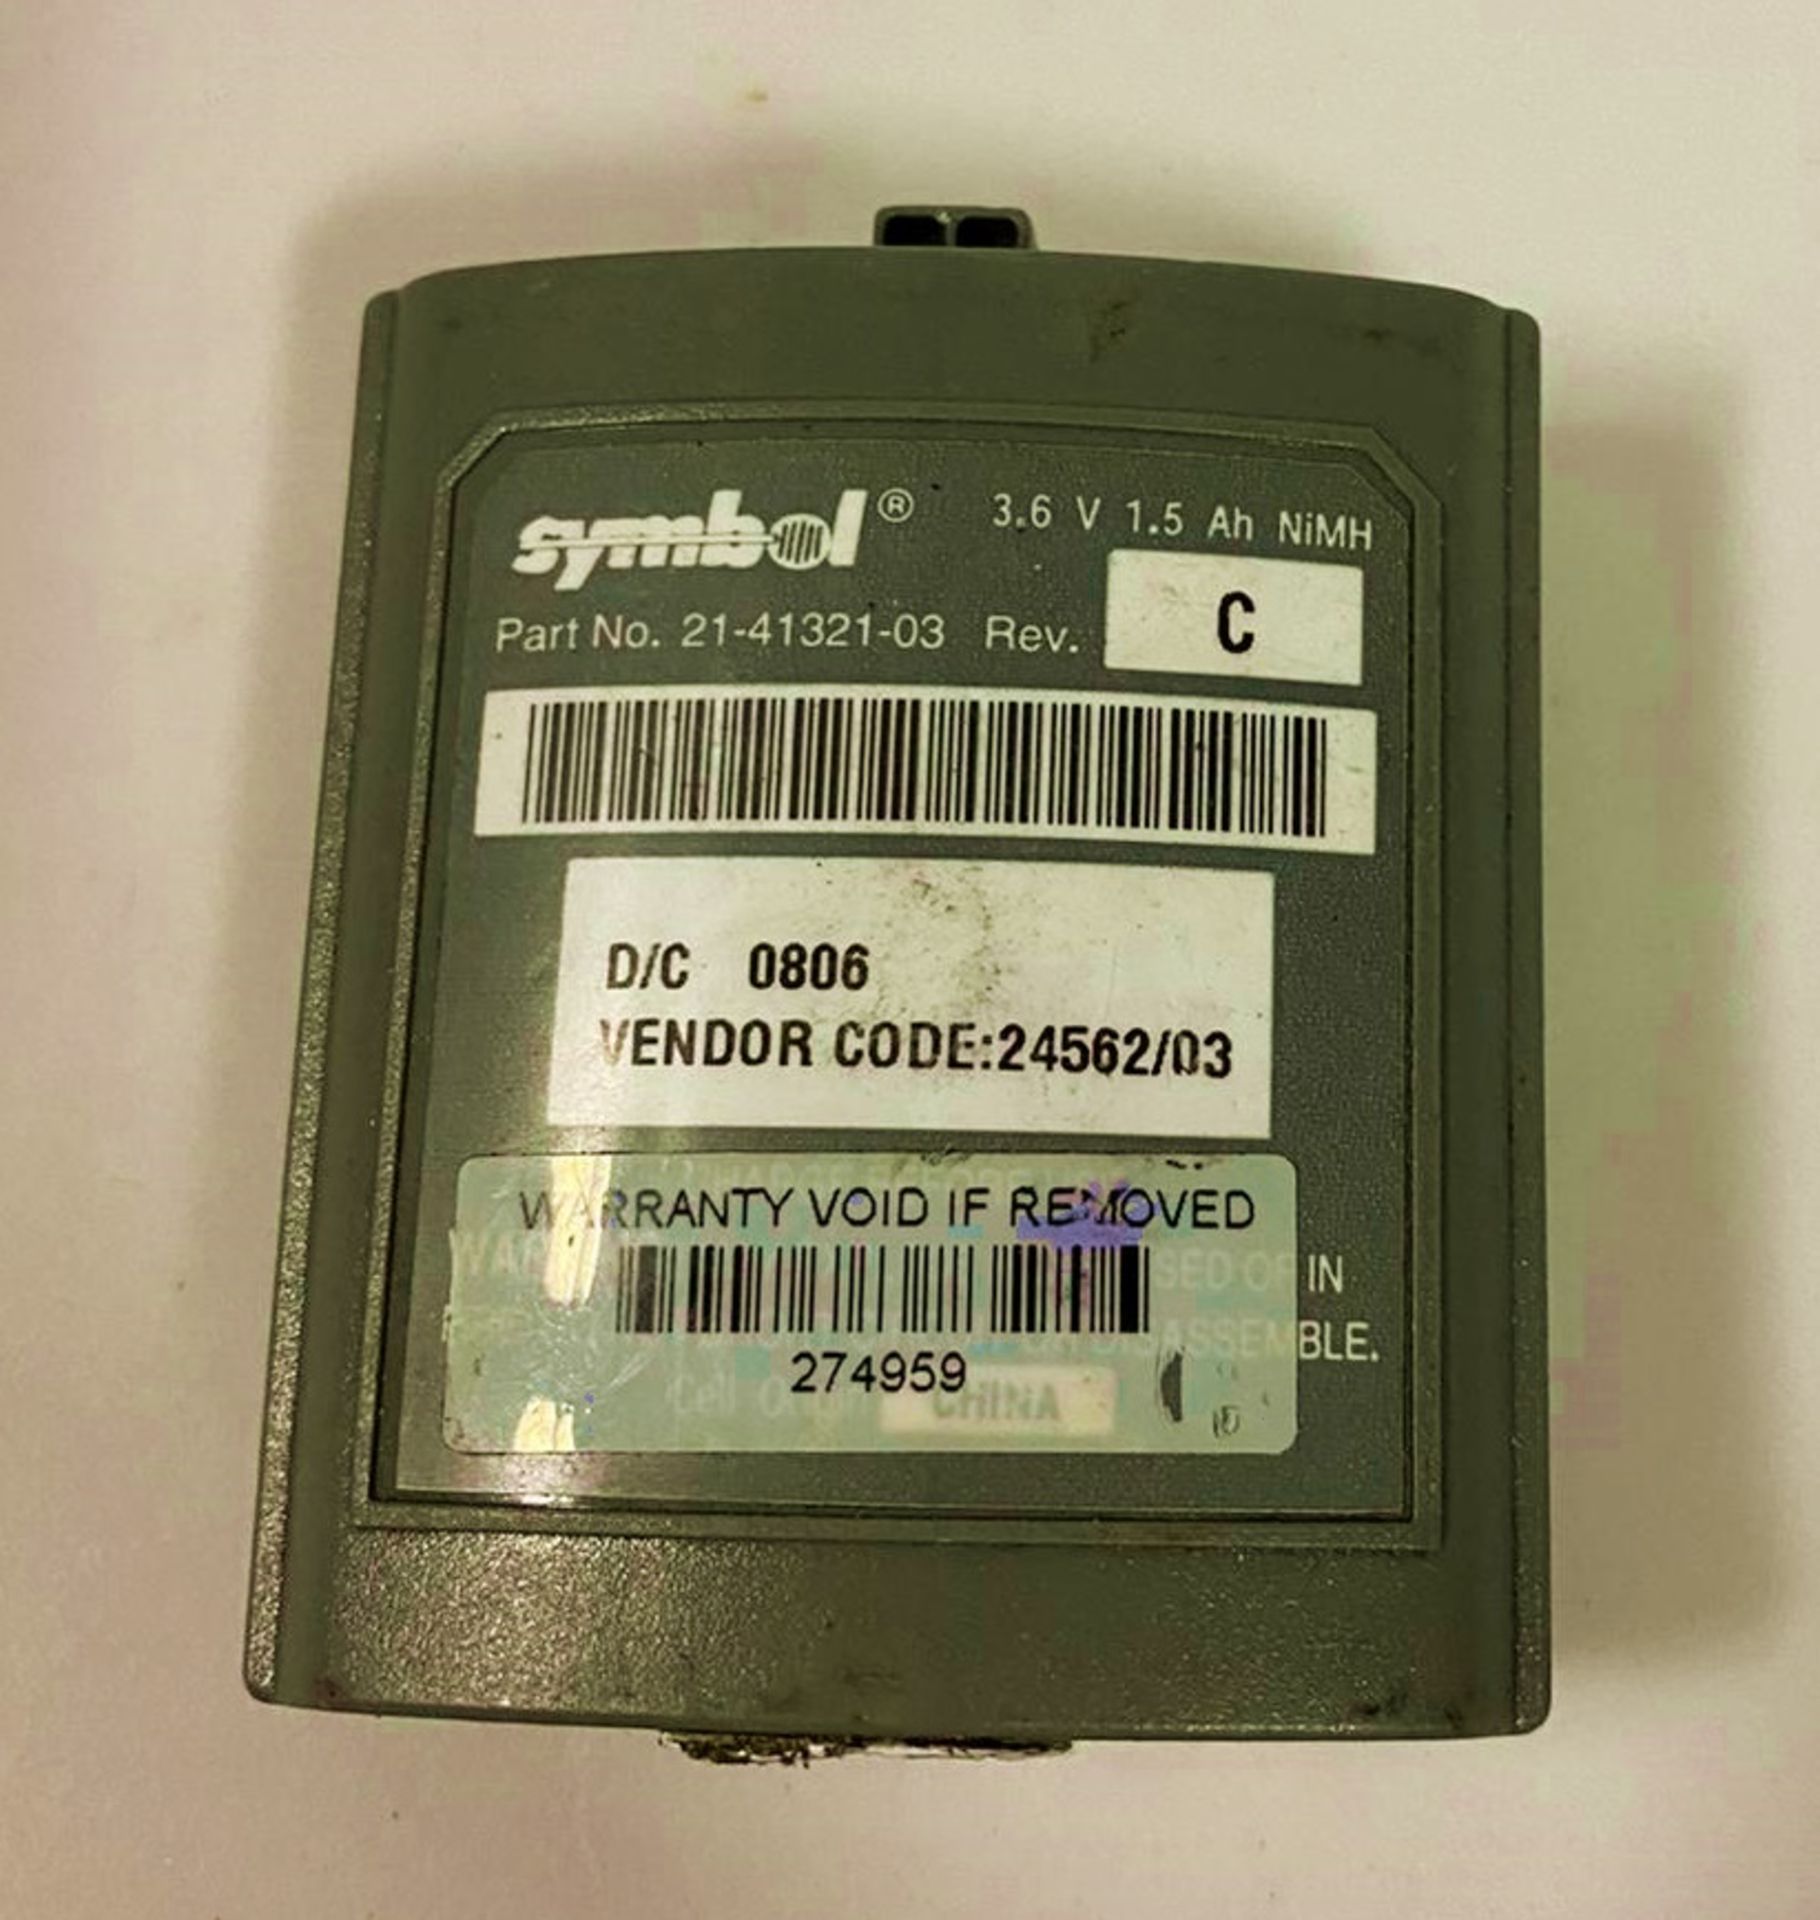 35 x Symbol Barcode Scanner Batteries - Type 21-4321-03 - CL011 - OSU 2 D1 (MS174) - Location: - Image 4 of 4